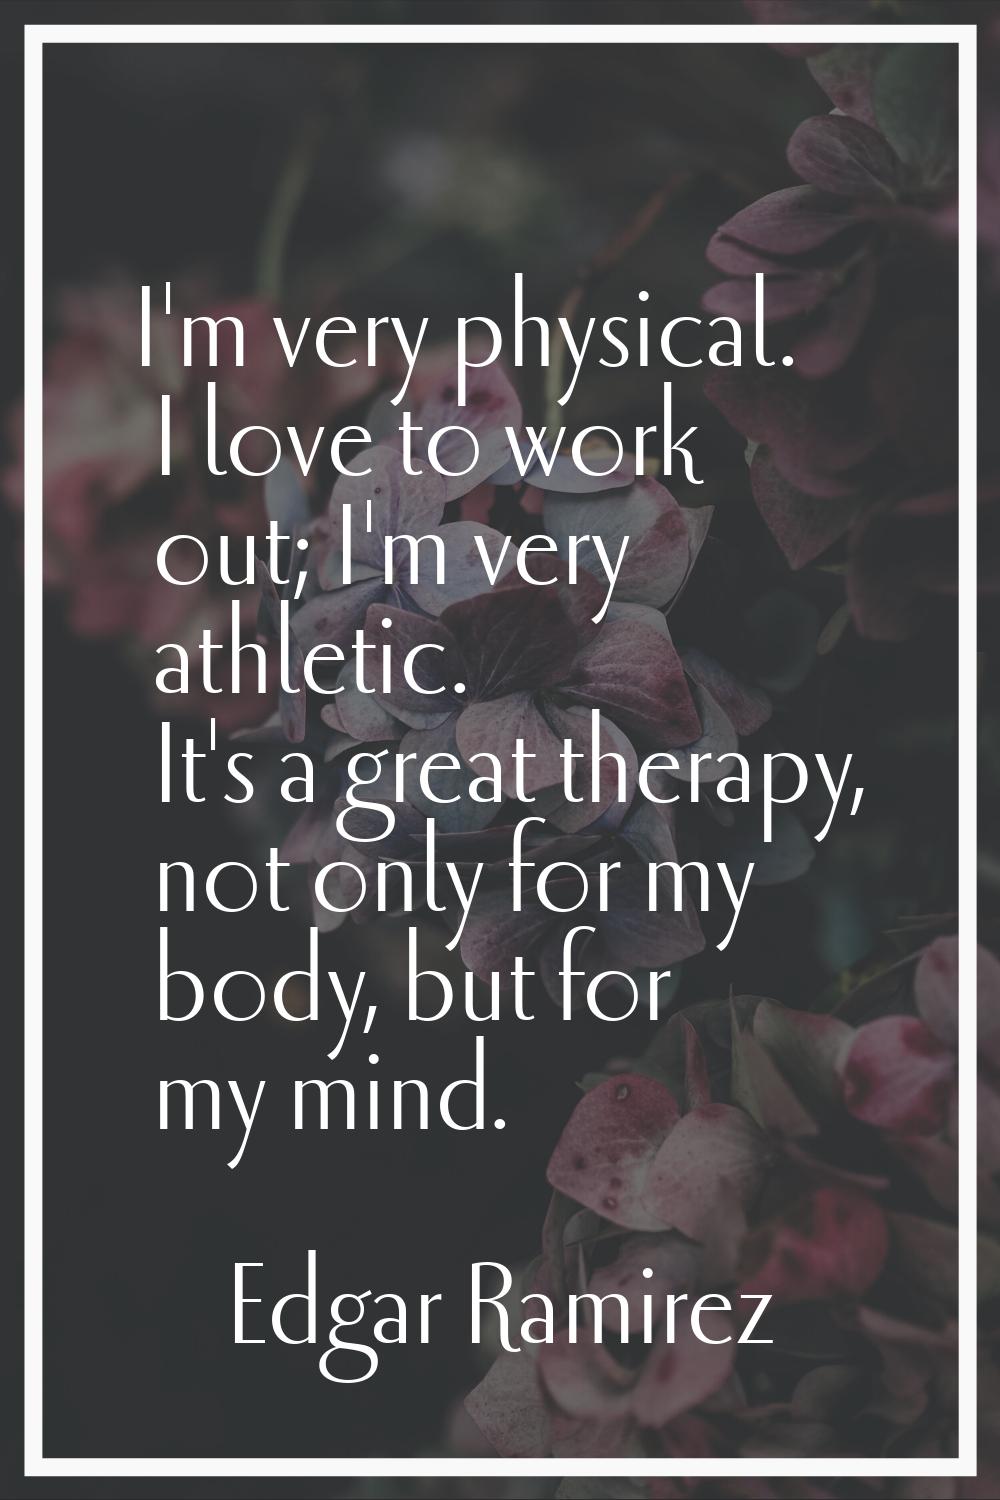 I'm very physical. I love to work out; I'm very athletic. It's a great therapy, not only for my bod